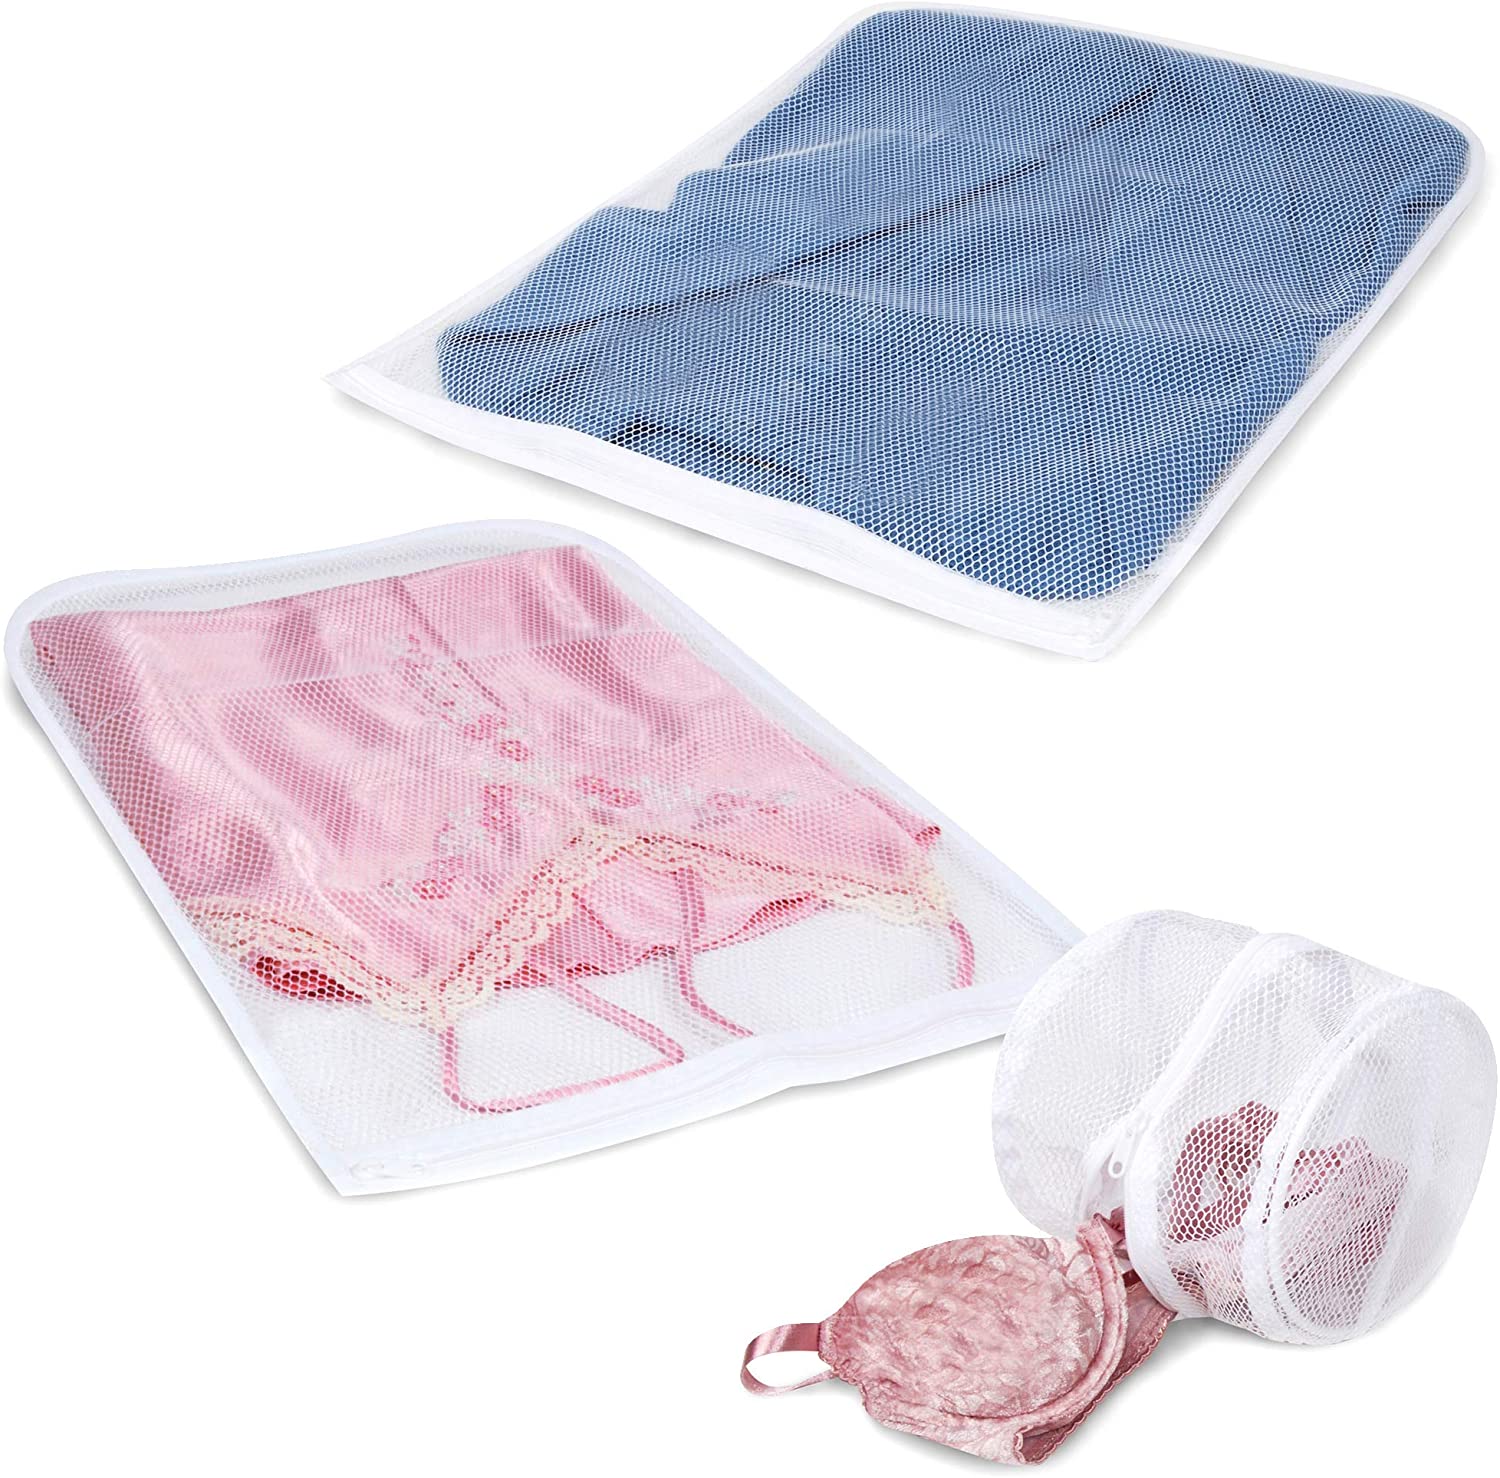 Mesh Bra Bags For Washing Machine Lingerie Wash Bags For Laundry